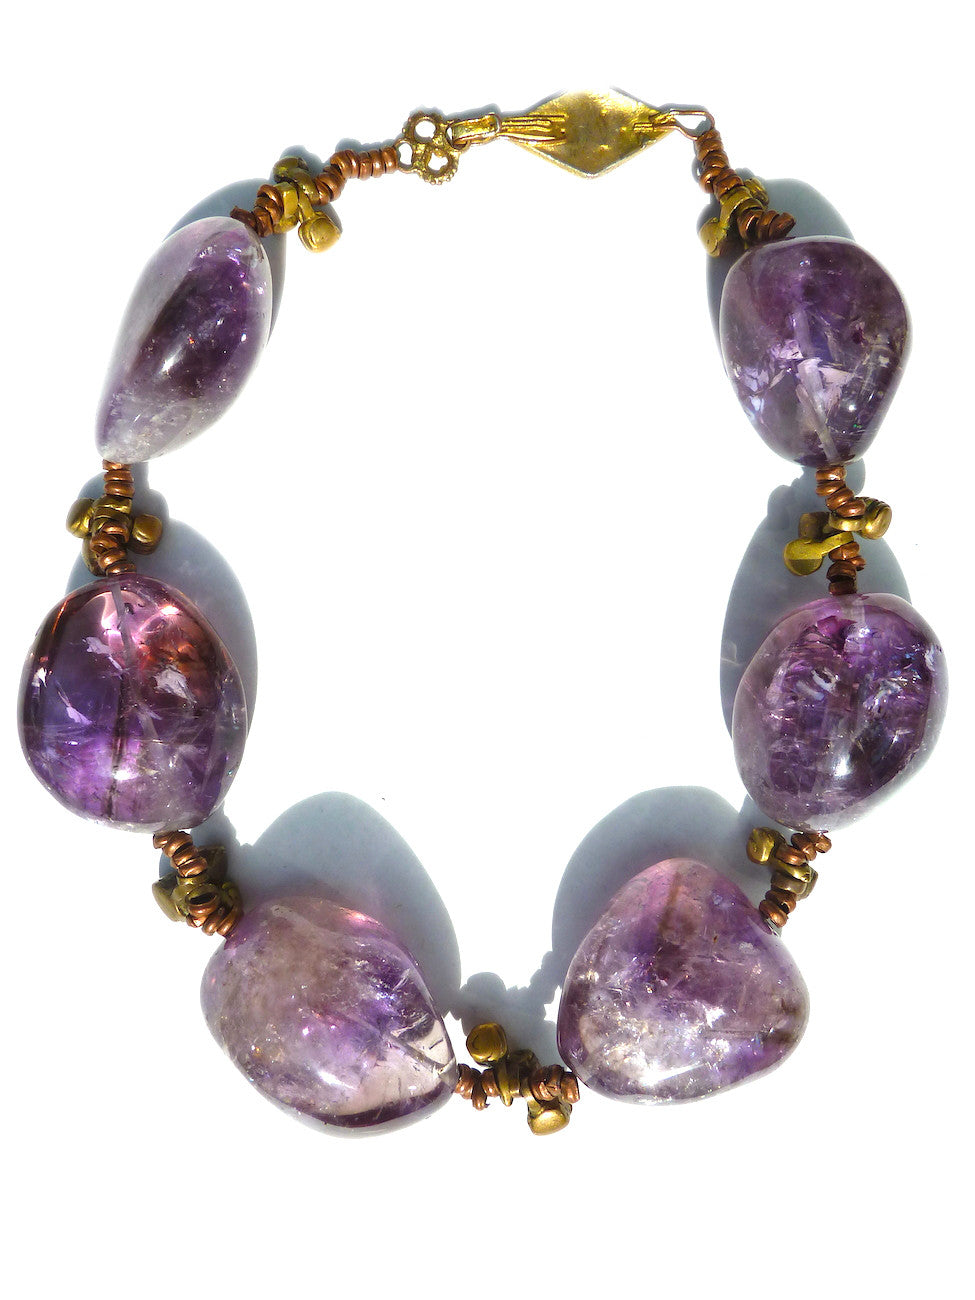 Necklace Enormous Ametrine With Vintage African Charms